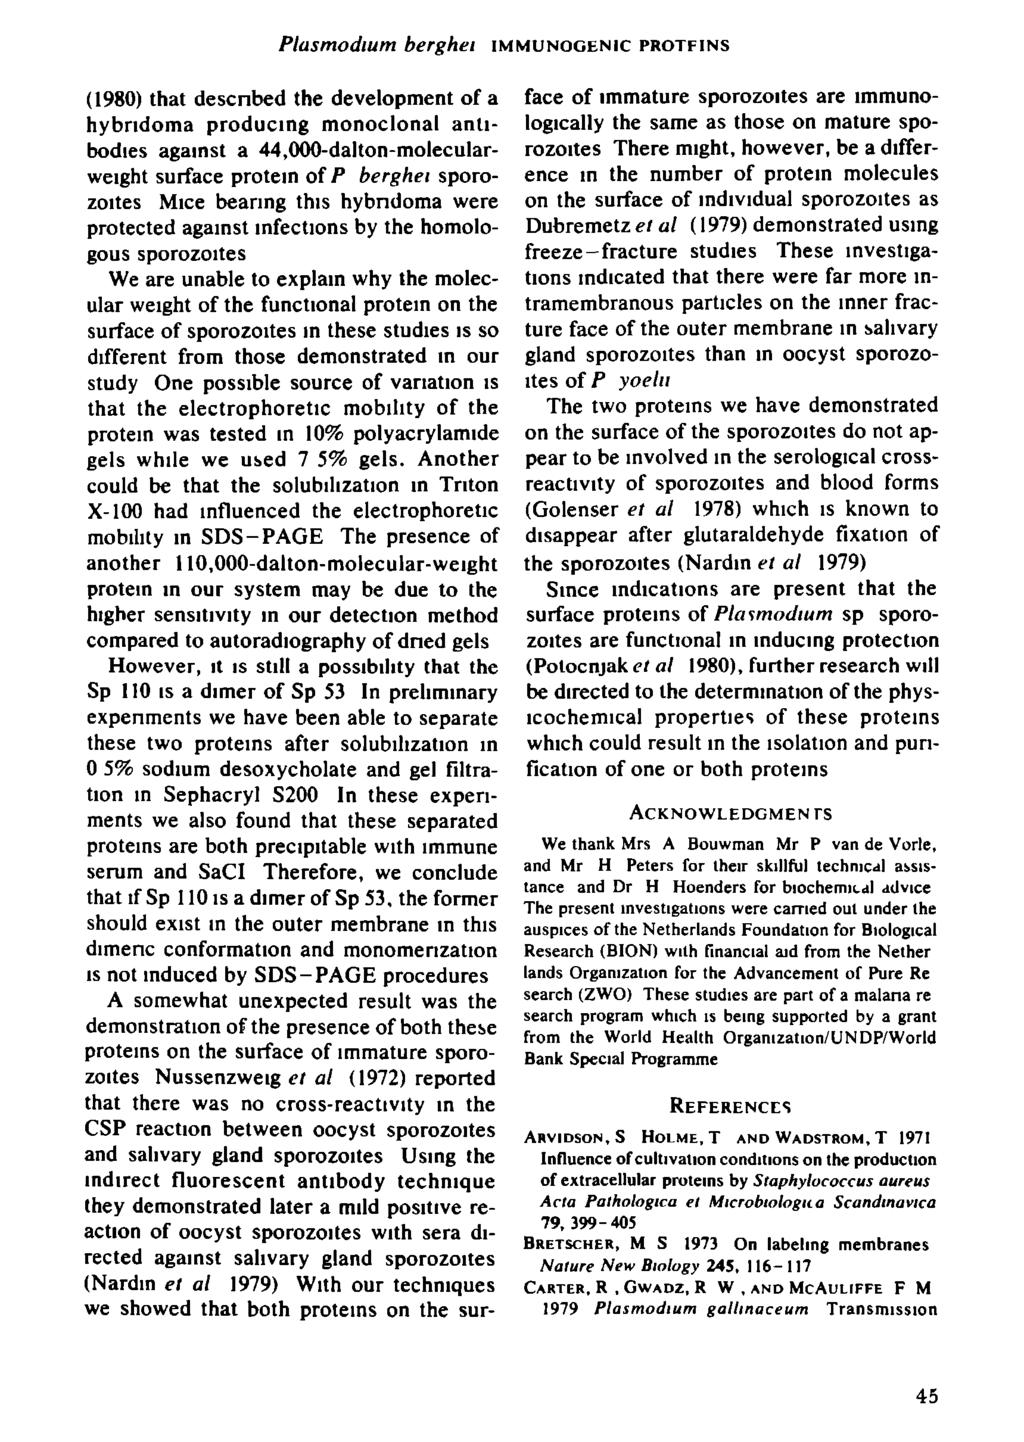 Plasmodium berghei IMMUNOGENIC PROTFINS (1980) that described the development of a hybndoma producing monoclonal antibodies against a 44,000-dalton-molecularweight surface protein of Ρ berghei